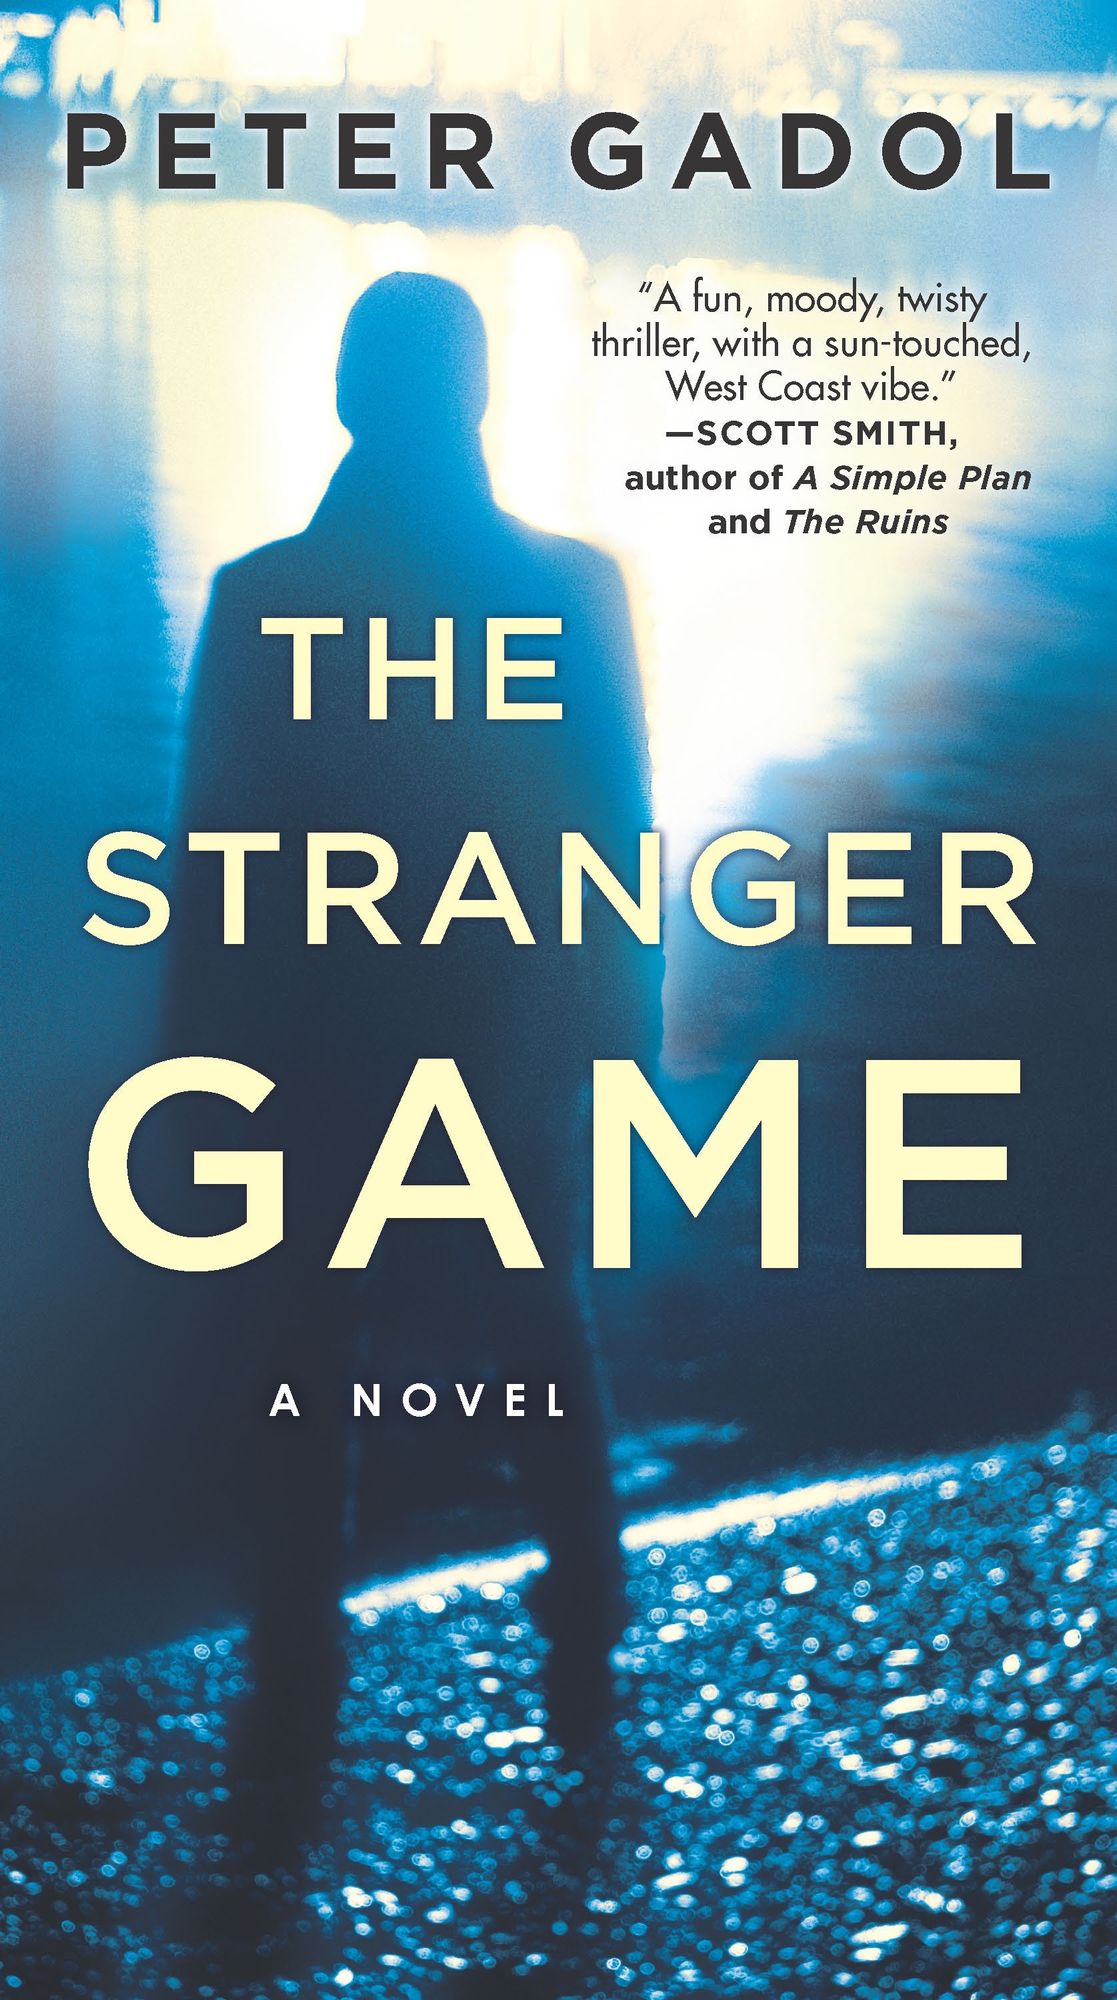 The Stranger Game by Peter Gadol